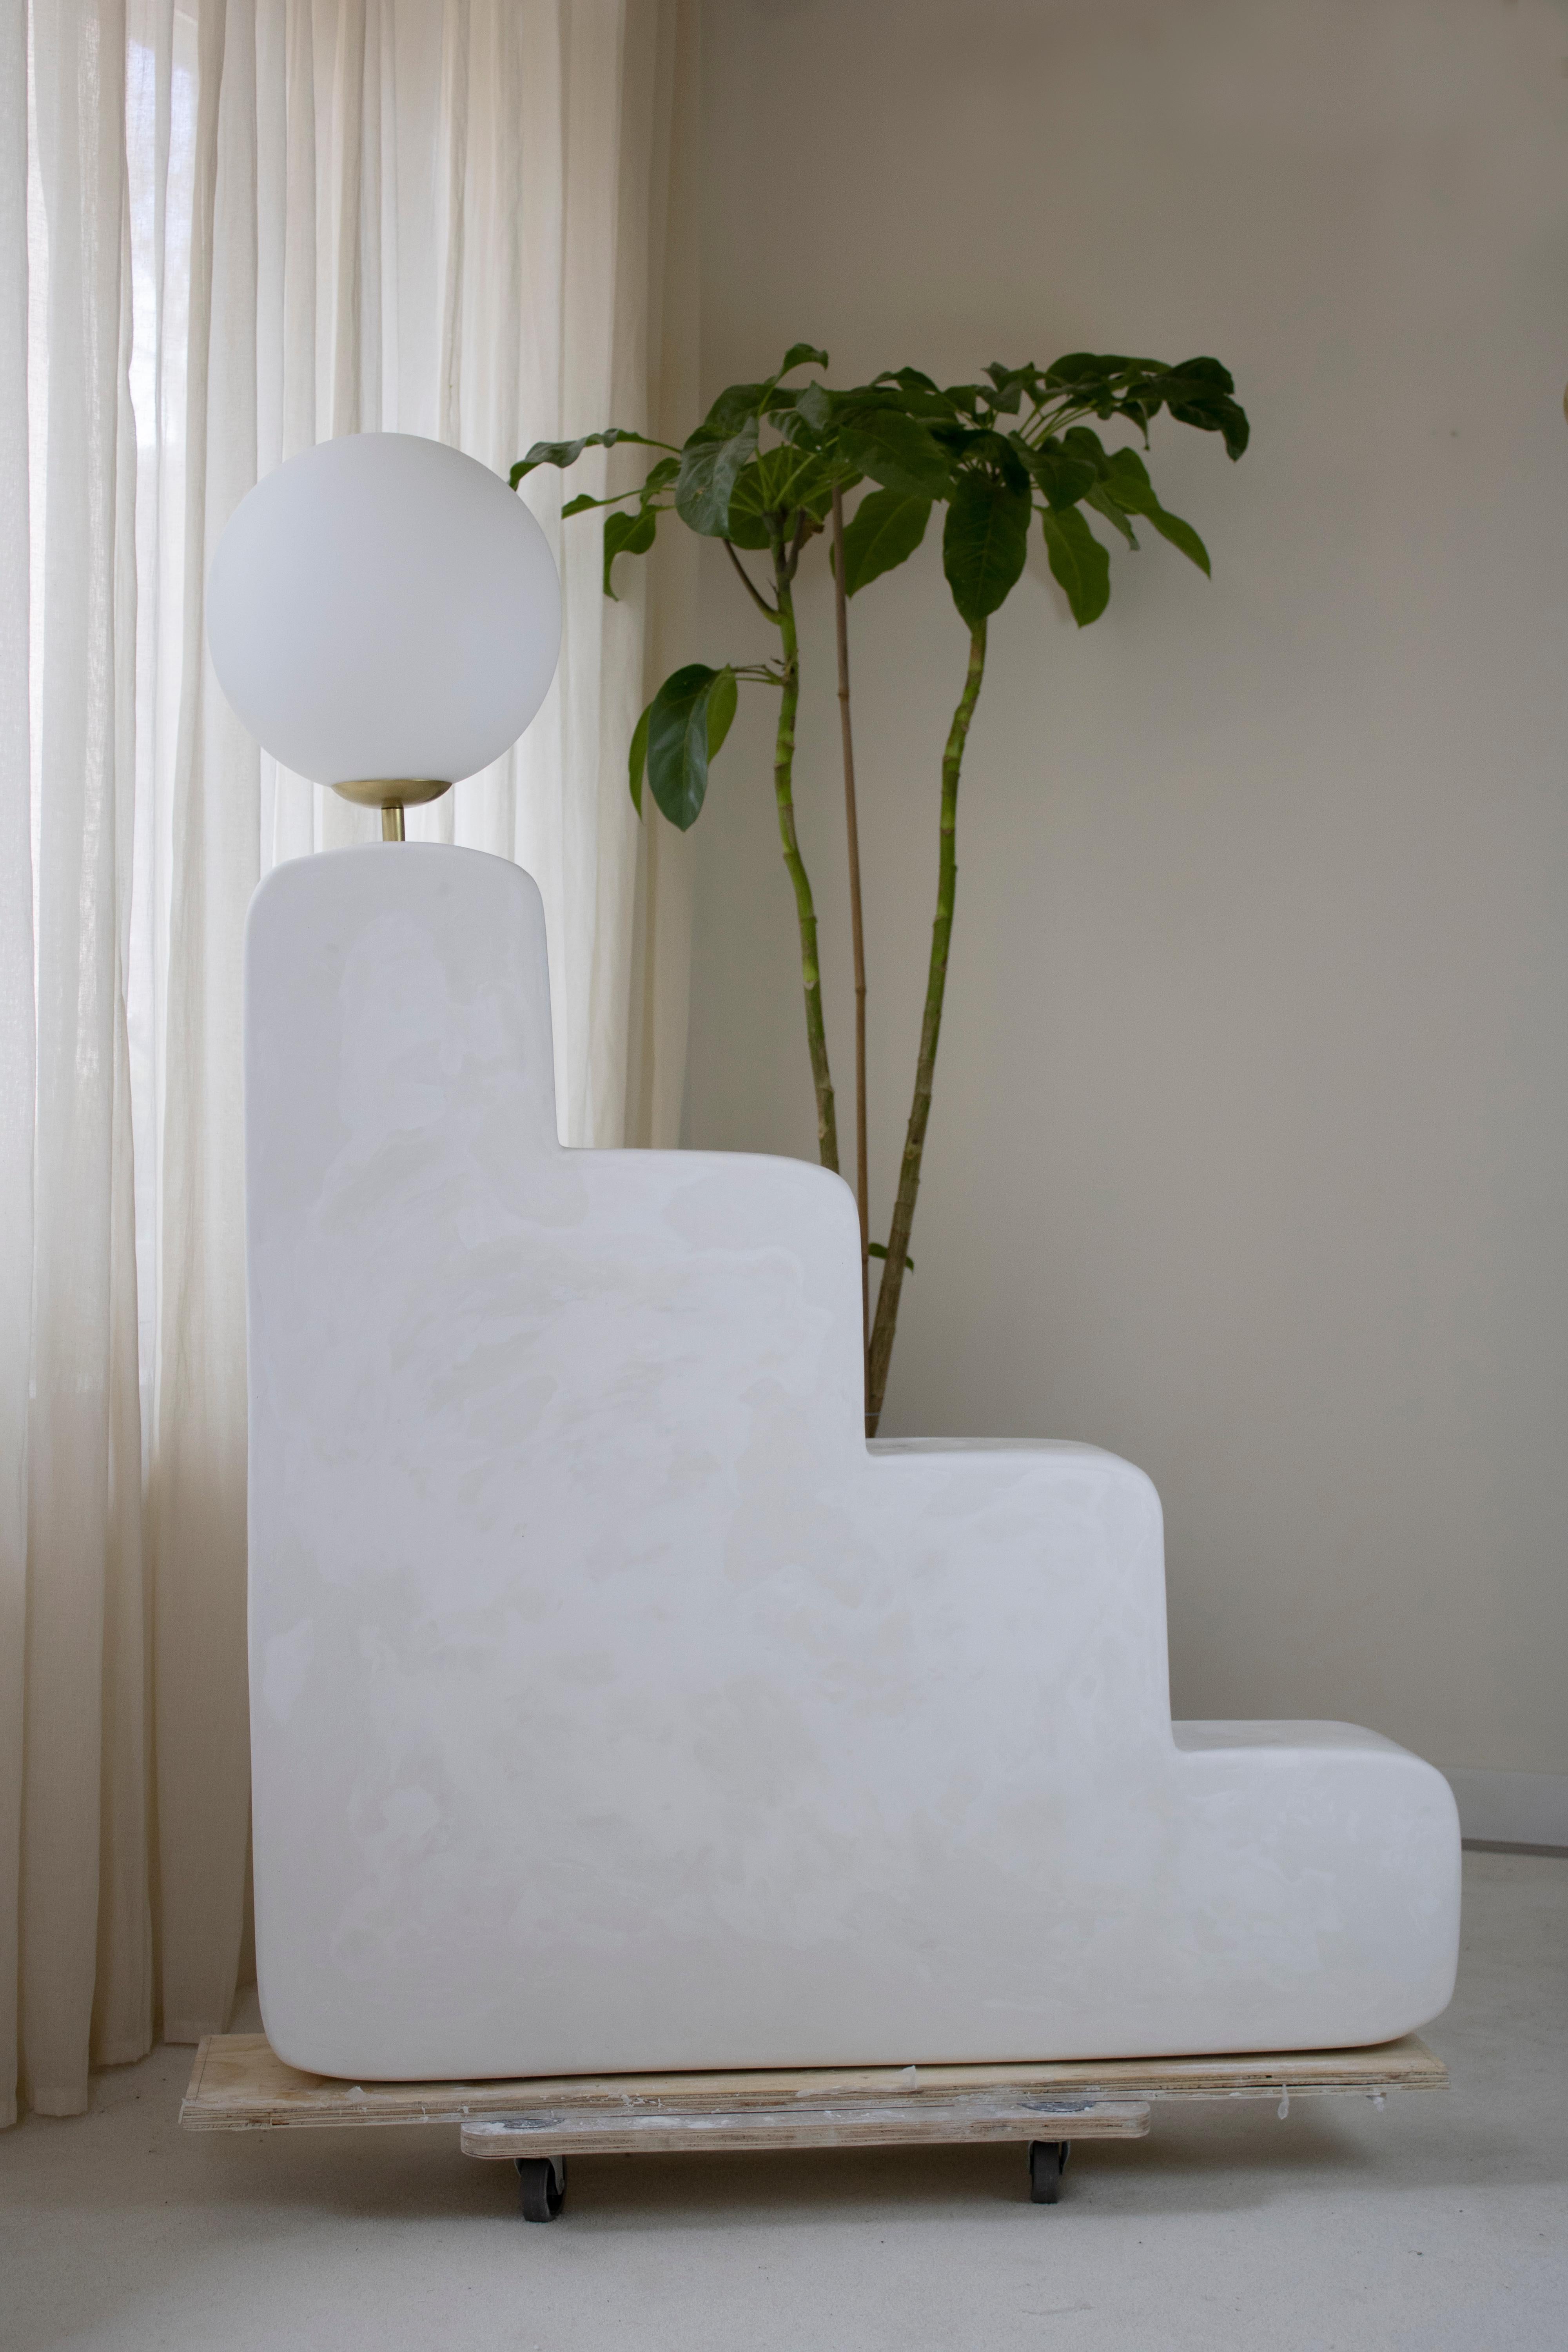 Big Step lamp by AOAO
Dimensions: W 100 x D 16 x H 135 cm
Materials: White plaster
Color options available upon request.

The idea was born after deciding to reconnect with my family and my grandfather – a sculptor artist. Learning to sculpt